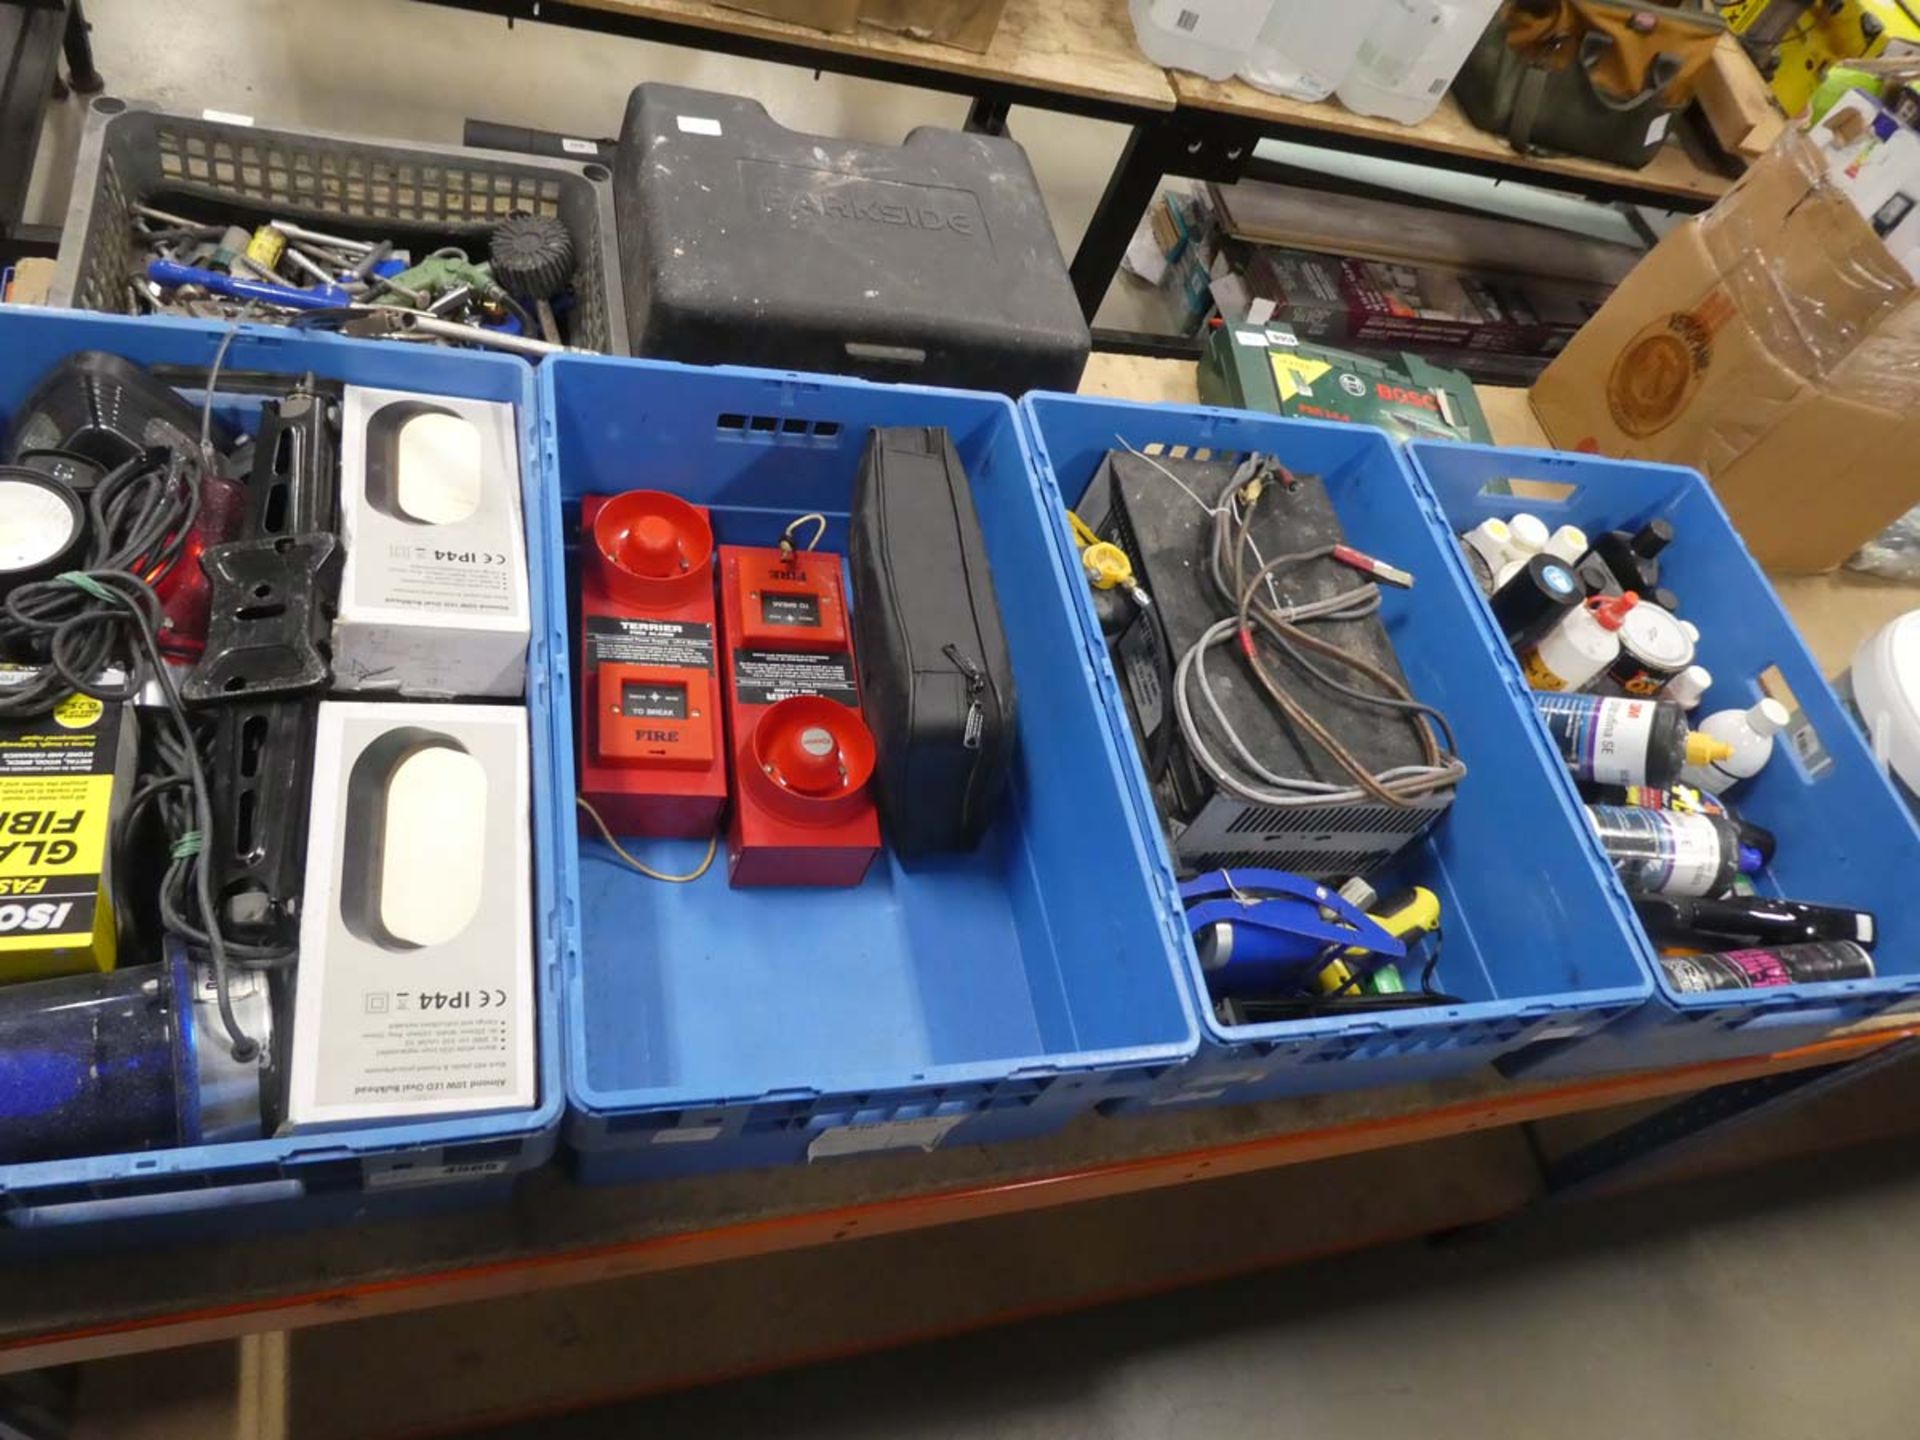 4 blue crates containing lights, jacks, fibreglass kit, fire alarms, battery charger and car